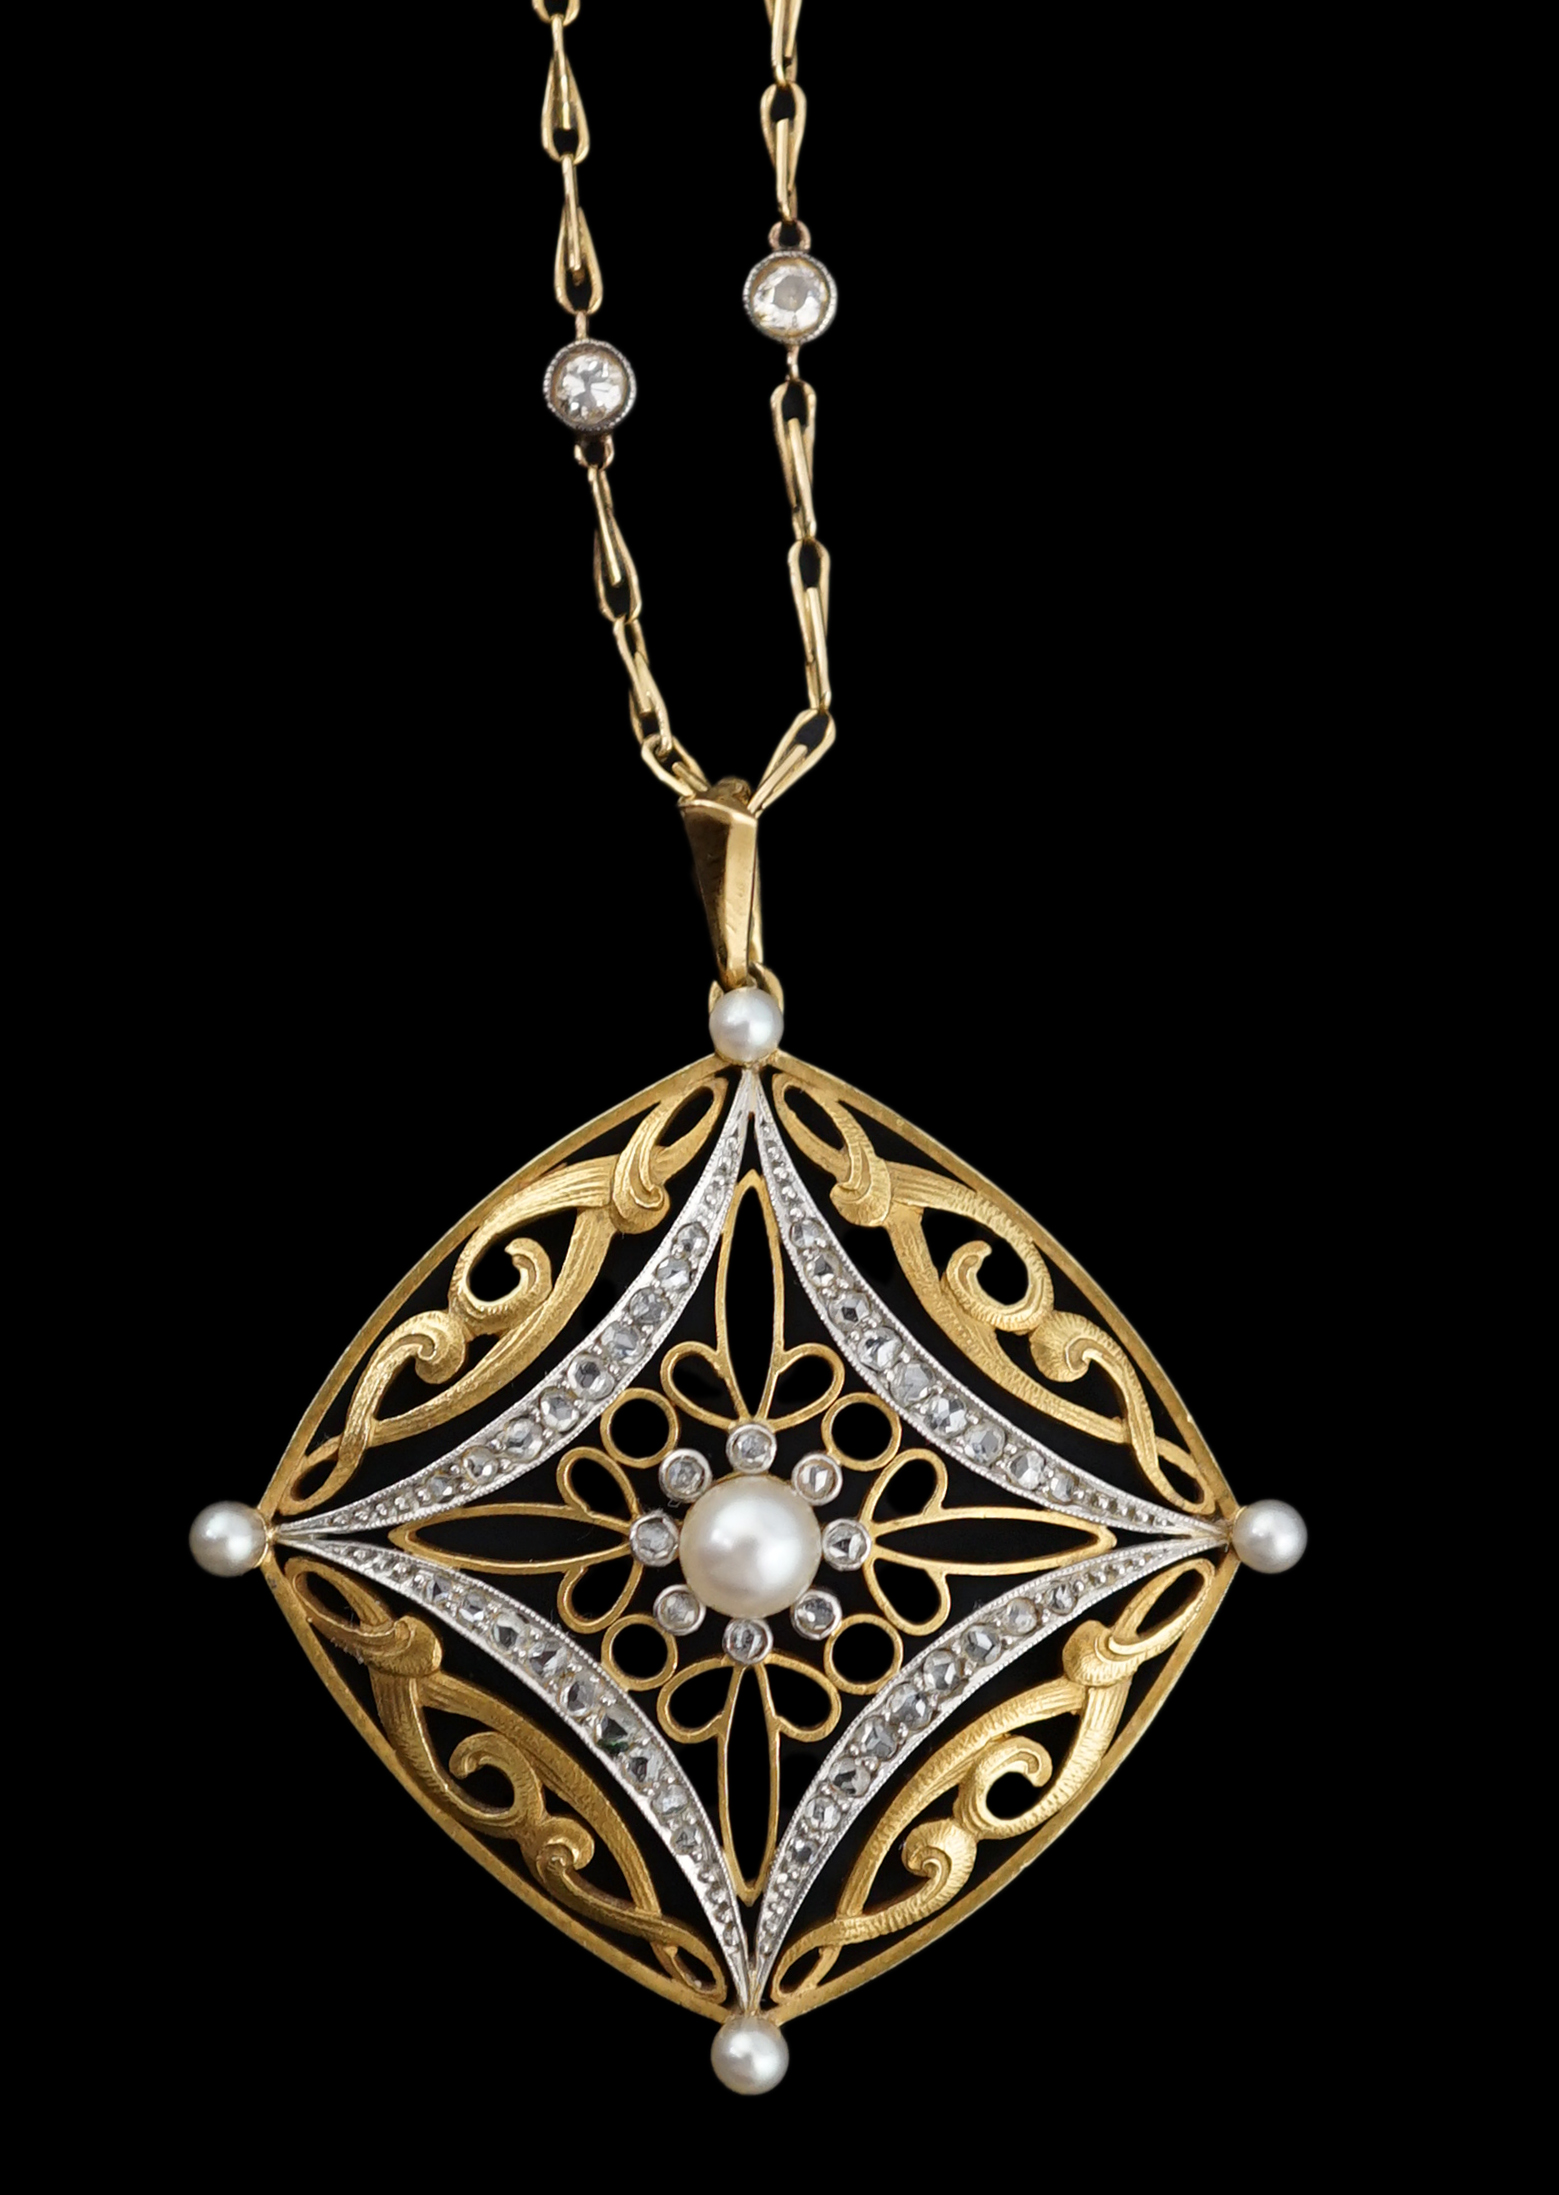 A French Belle Epoque pierced 18k gold, seed pearl and rose cut diamond set pendant, on a French 18k gold and diamond set spectacle necklace